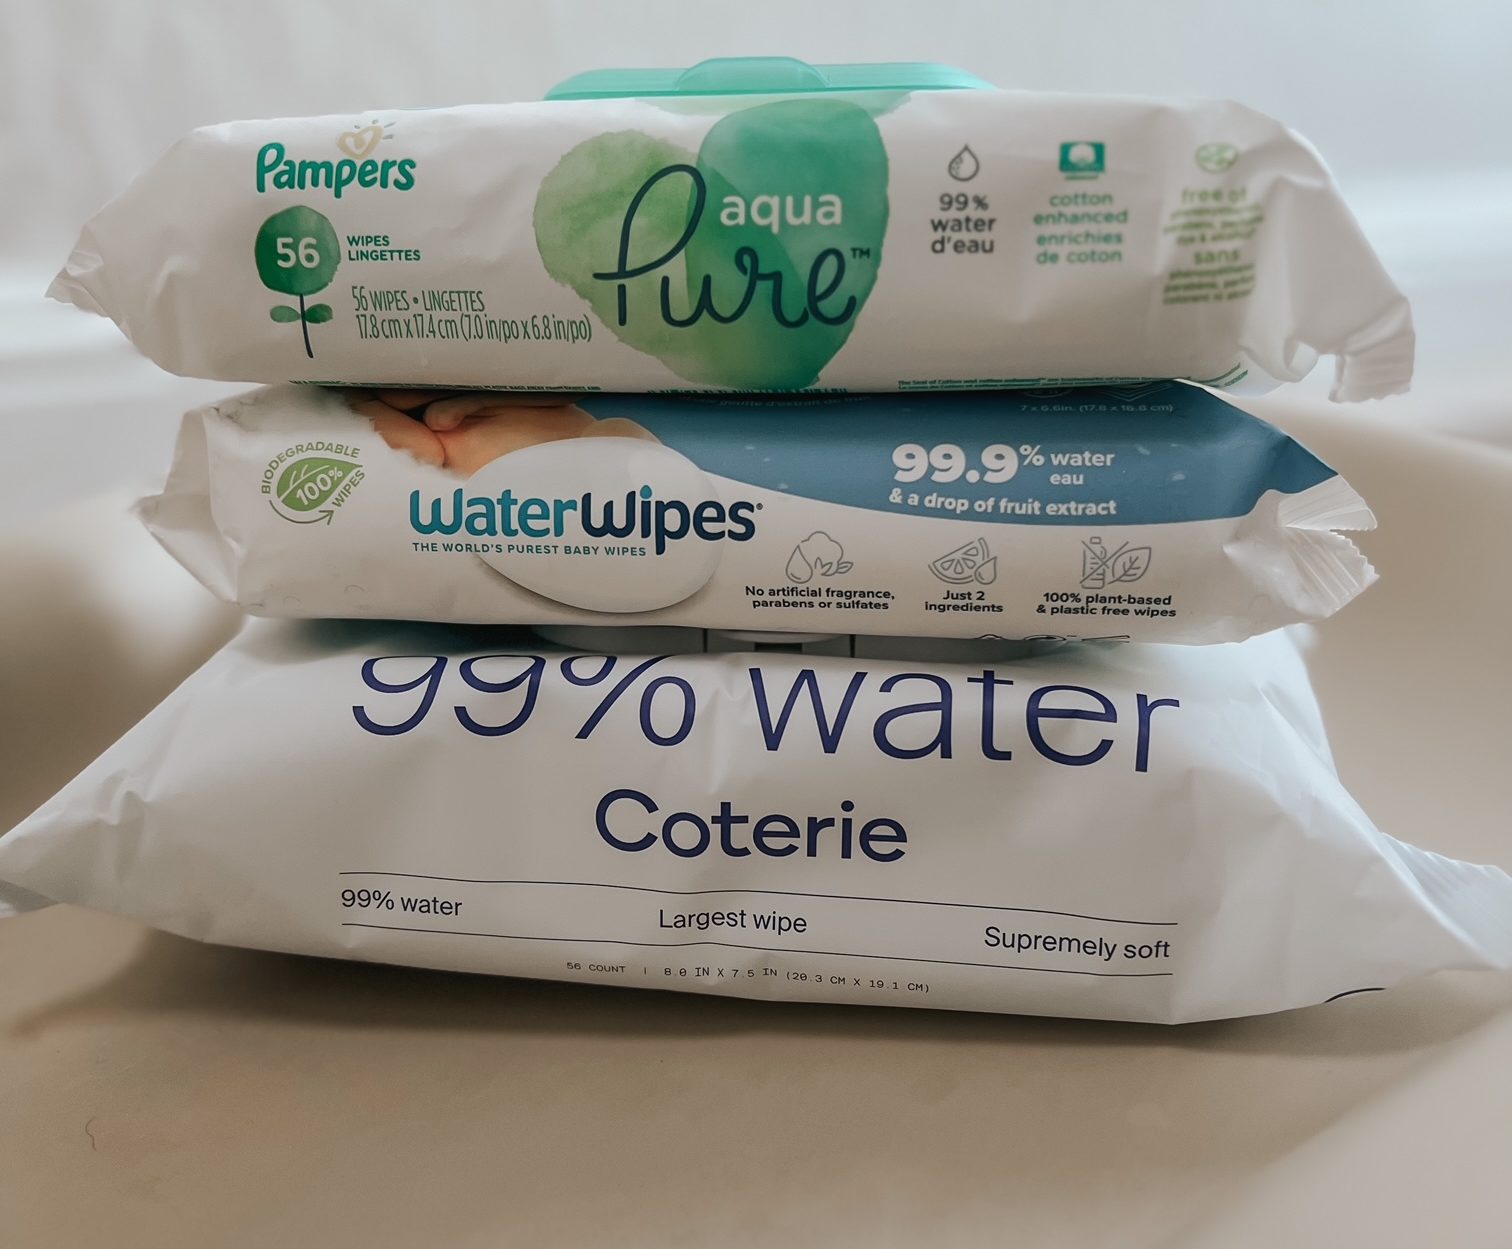 waterwipes vs pampers pure